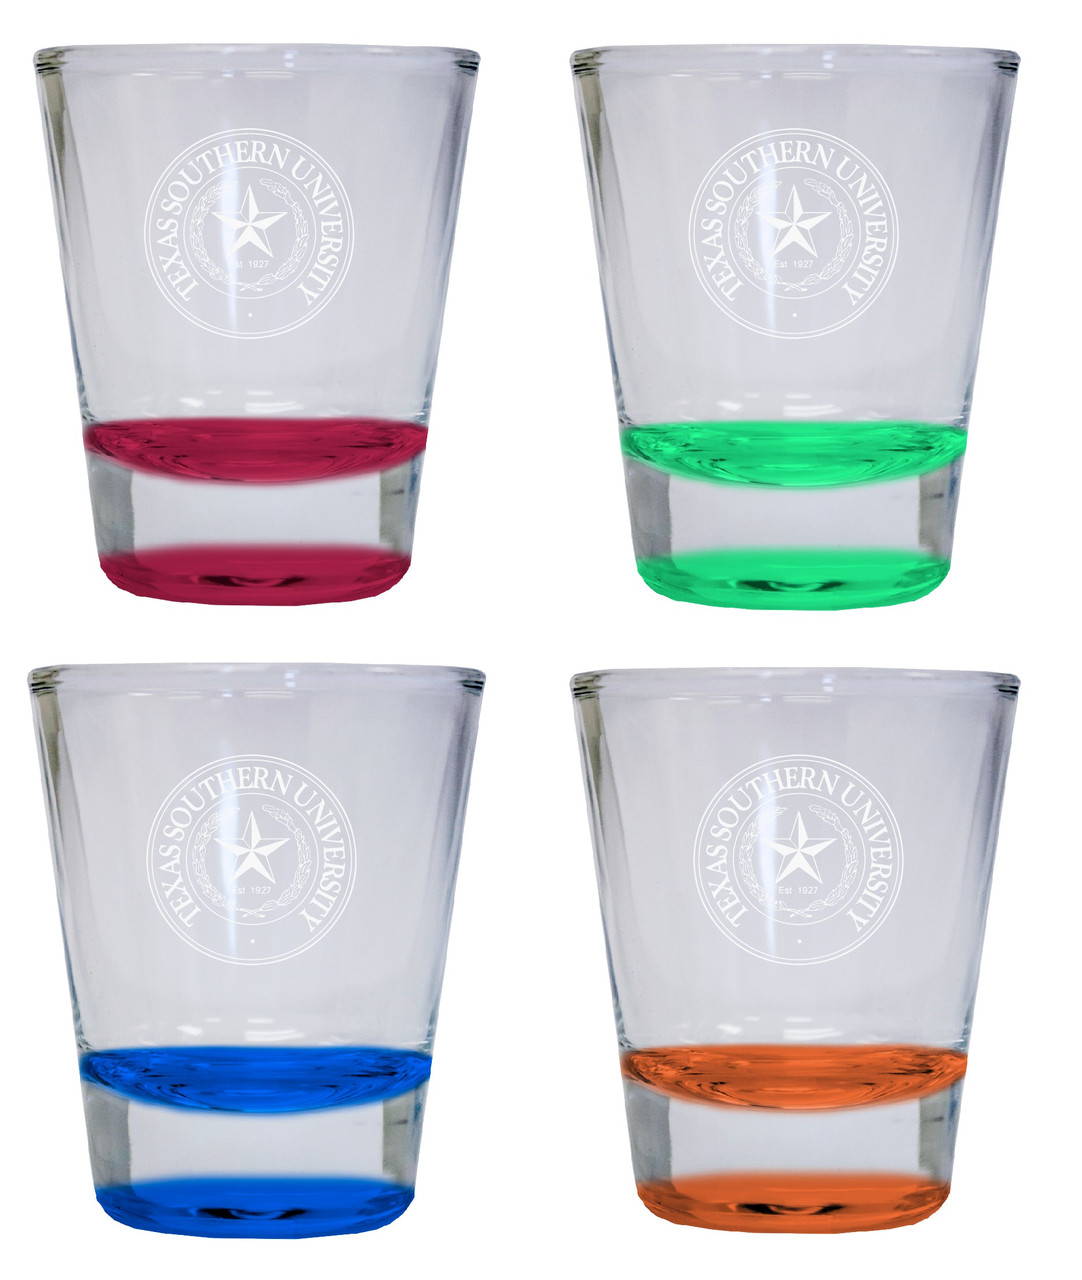 4-Pack Texas Southern University Etched Round Shot Glass 2 oz